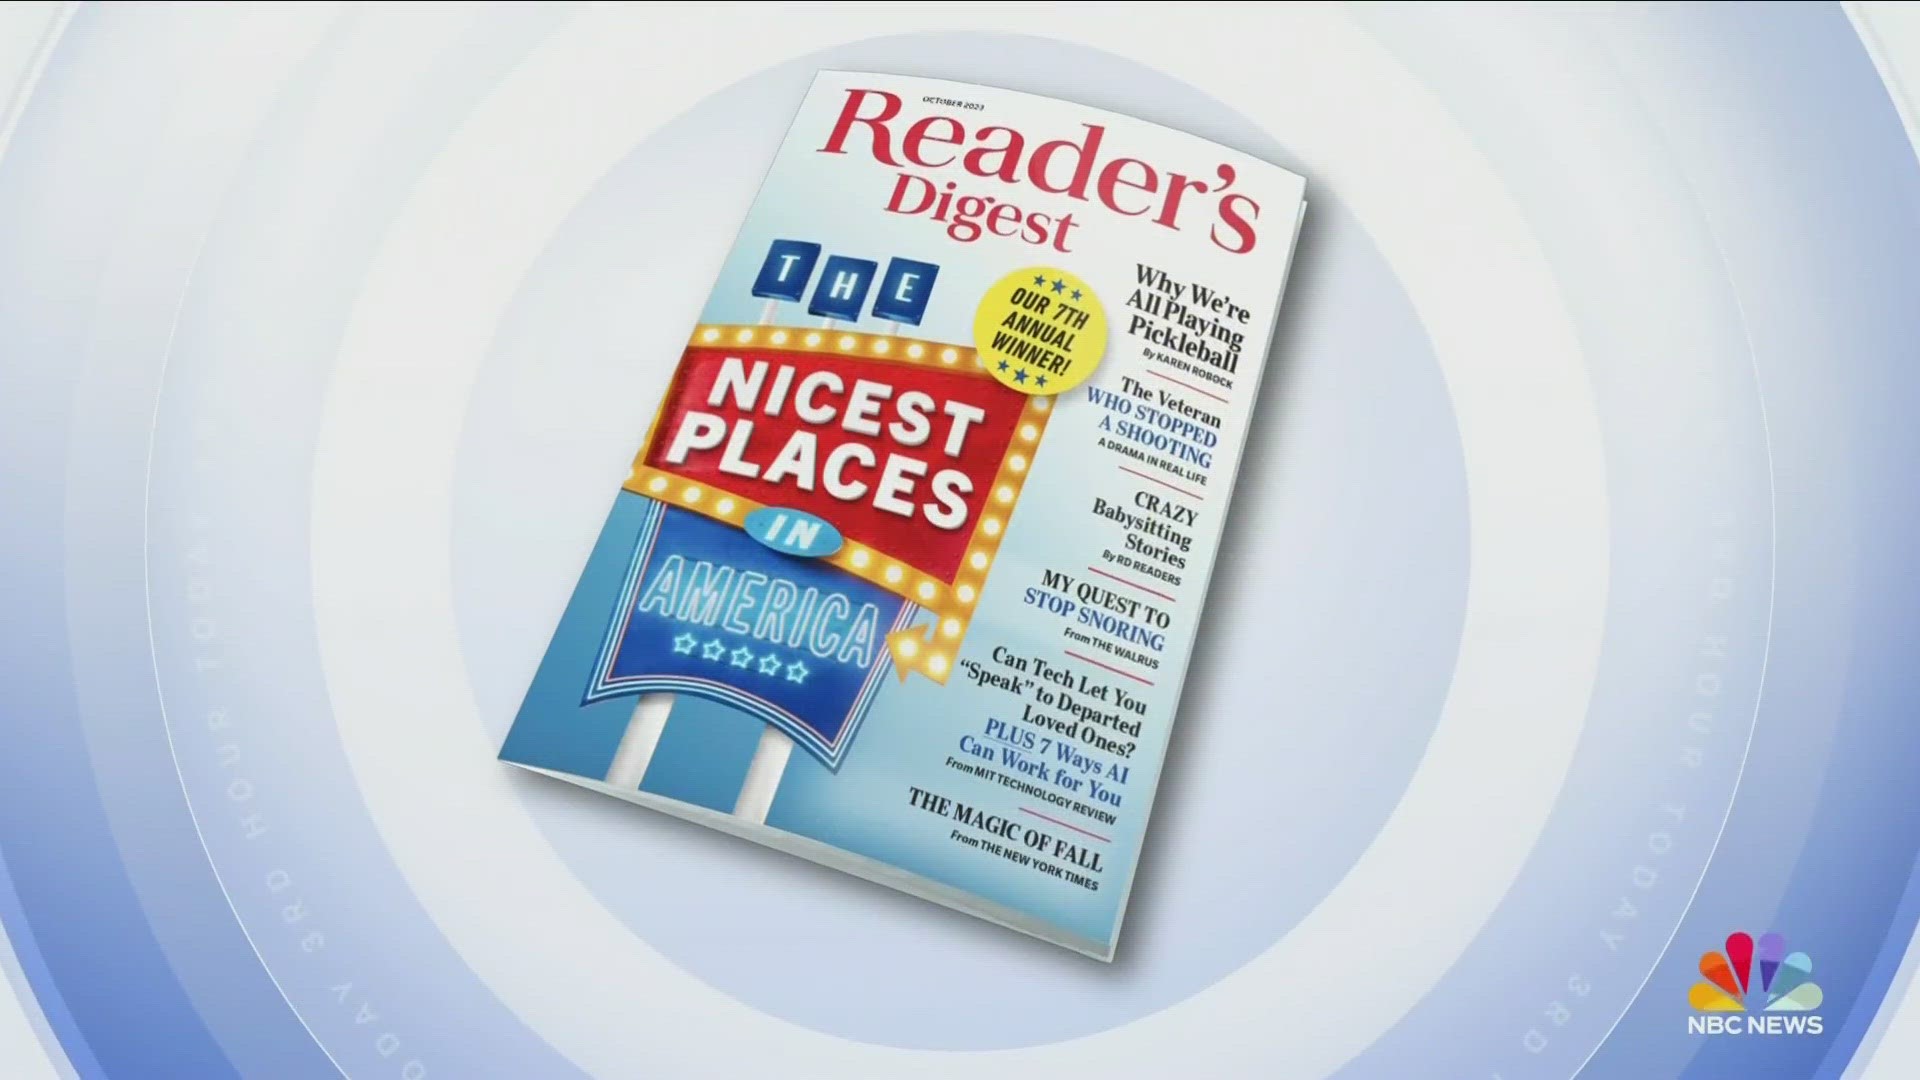 Reader's Digest calls Buffalo, NY 'Nicest Place in America'